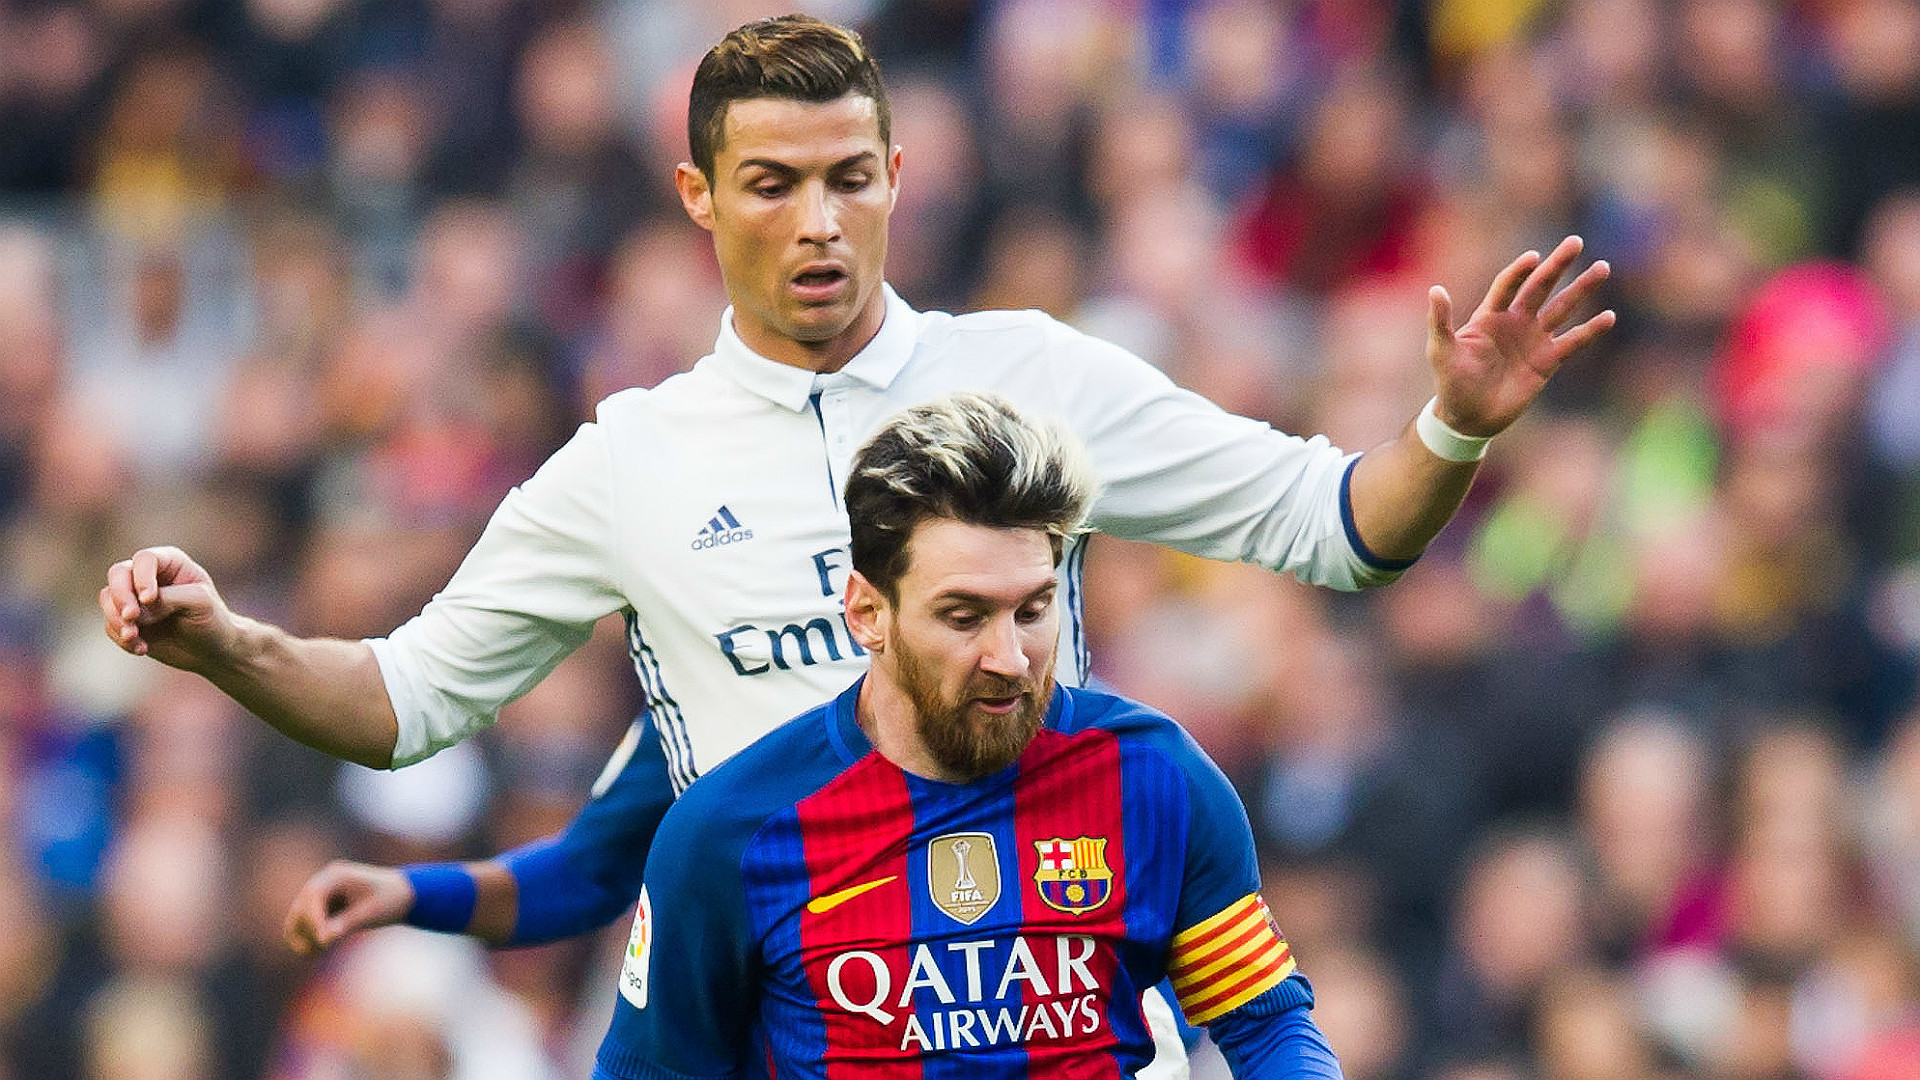 1920x1080  Champions League: Ronaldo speaks on beating Messi to 100 goals -  Daily Post Nigeria